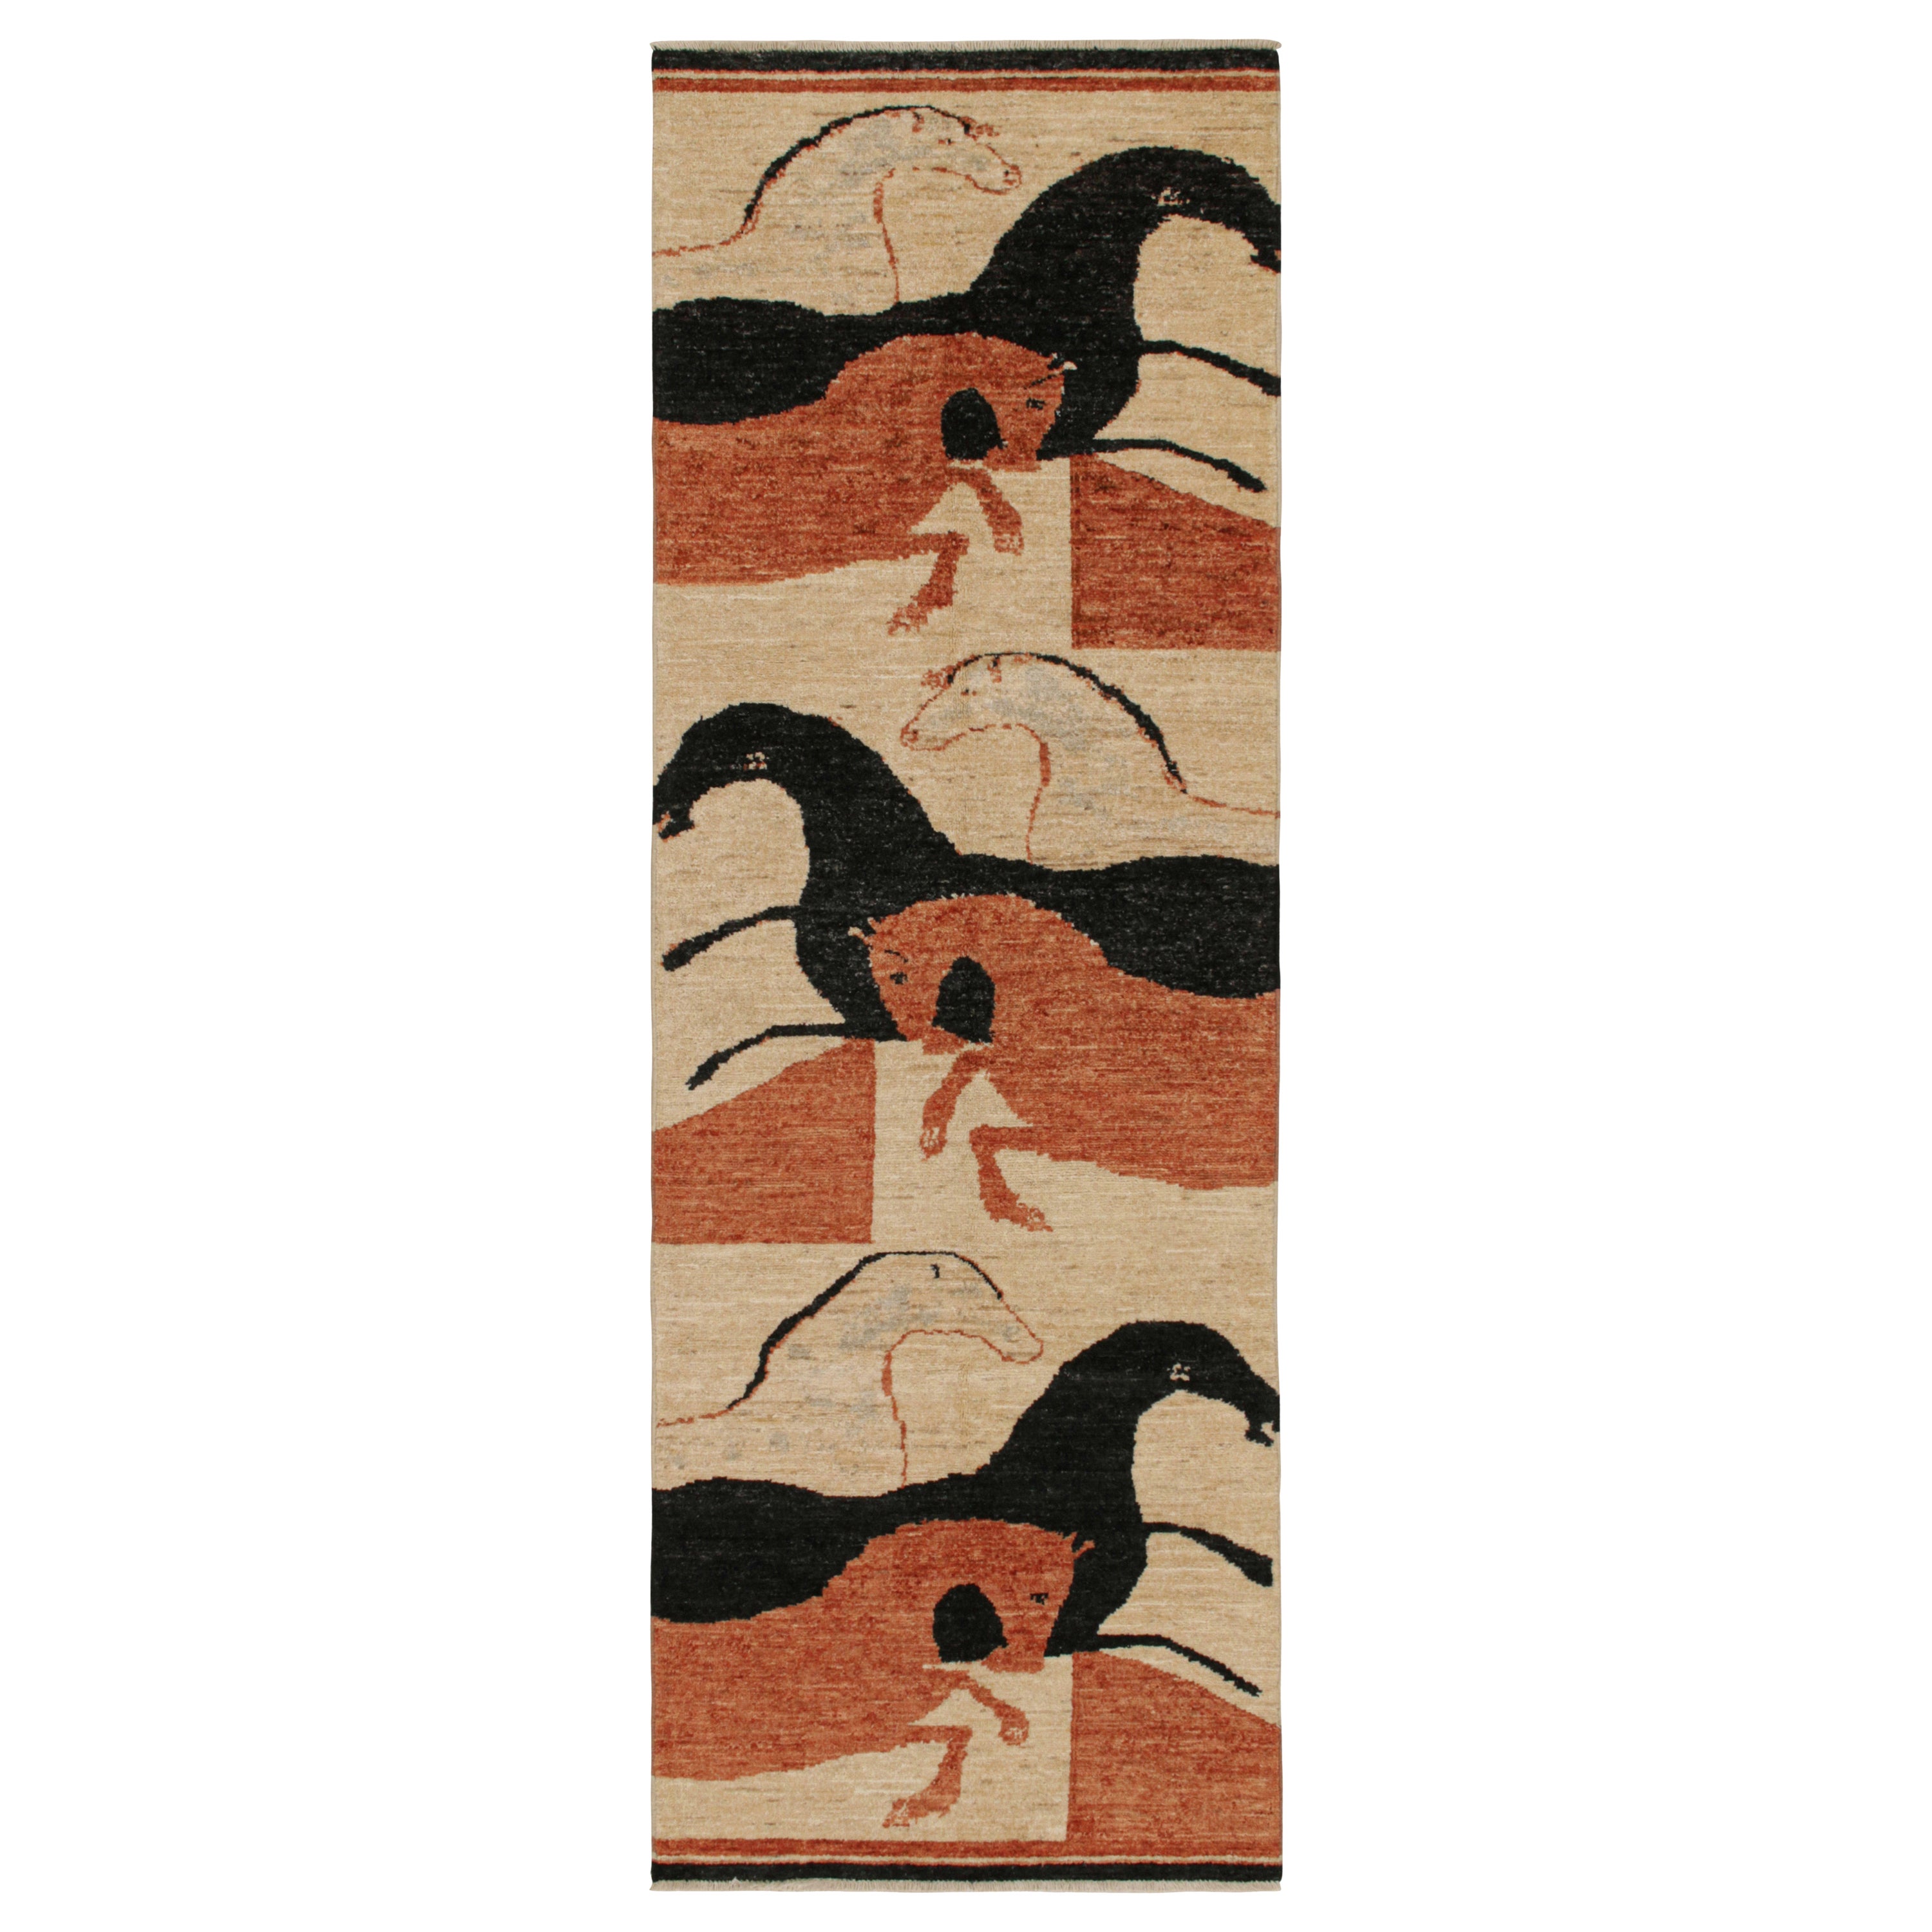 Rug & Kilim’s Persian Style Runner in Beige with Pink and Black Horse Pictorials